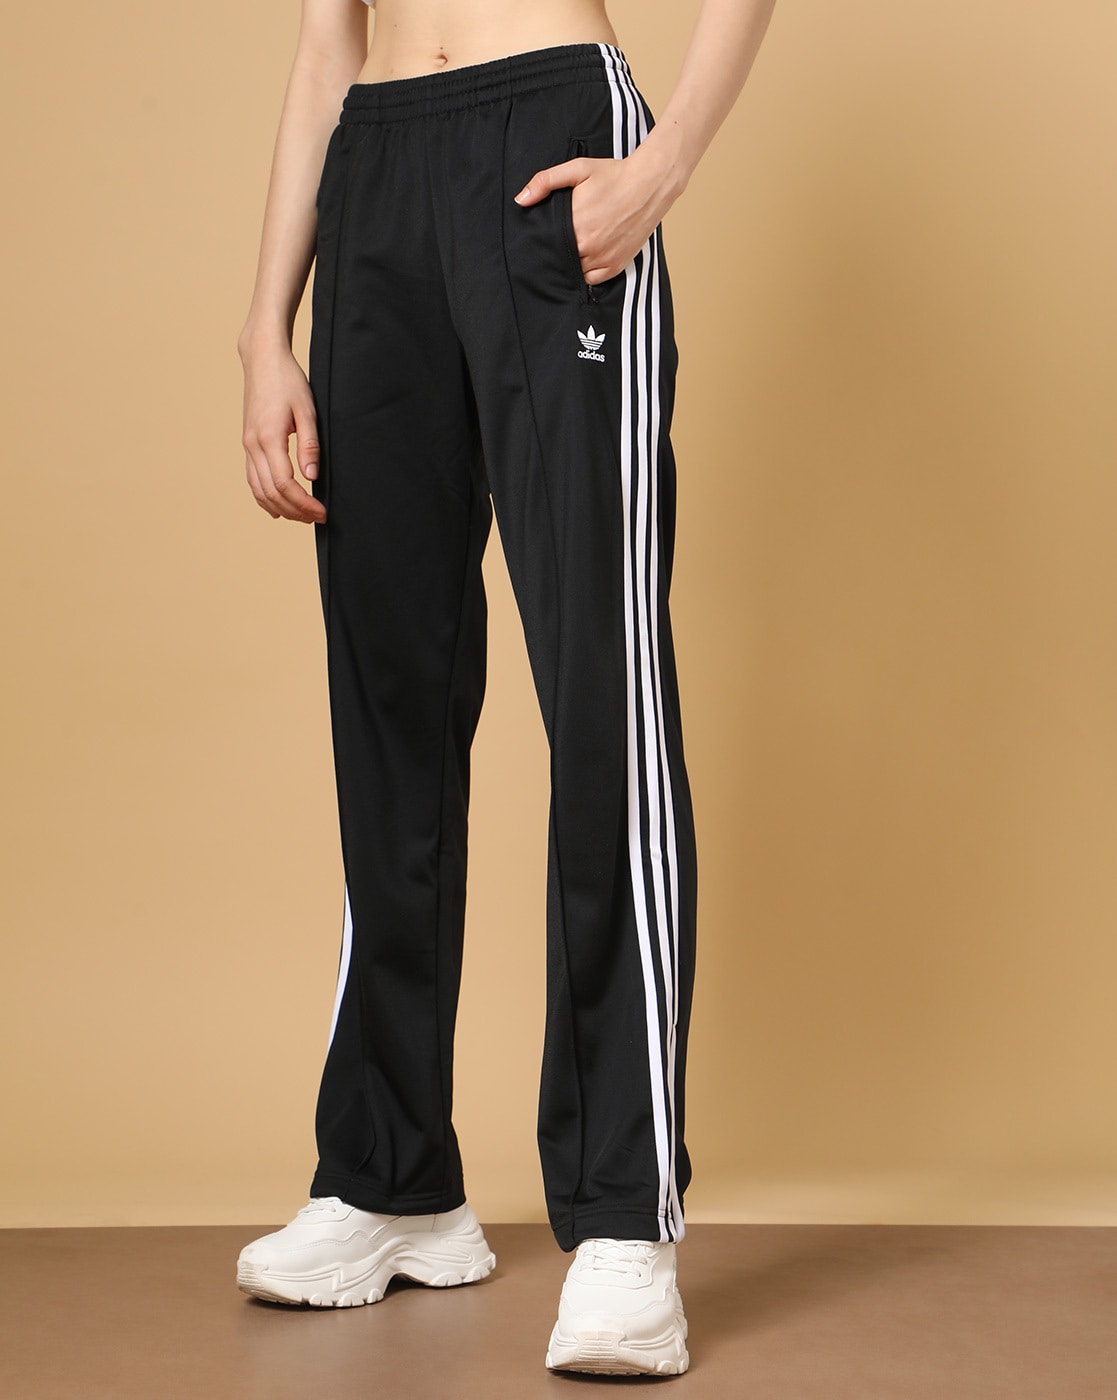 Buy Black Track Pants for Women by Adidas Originals Online